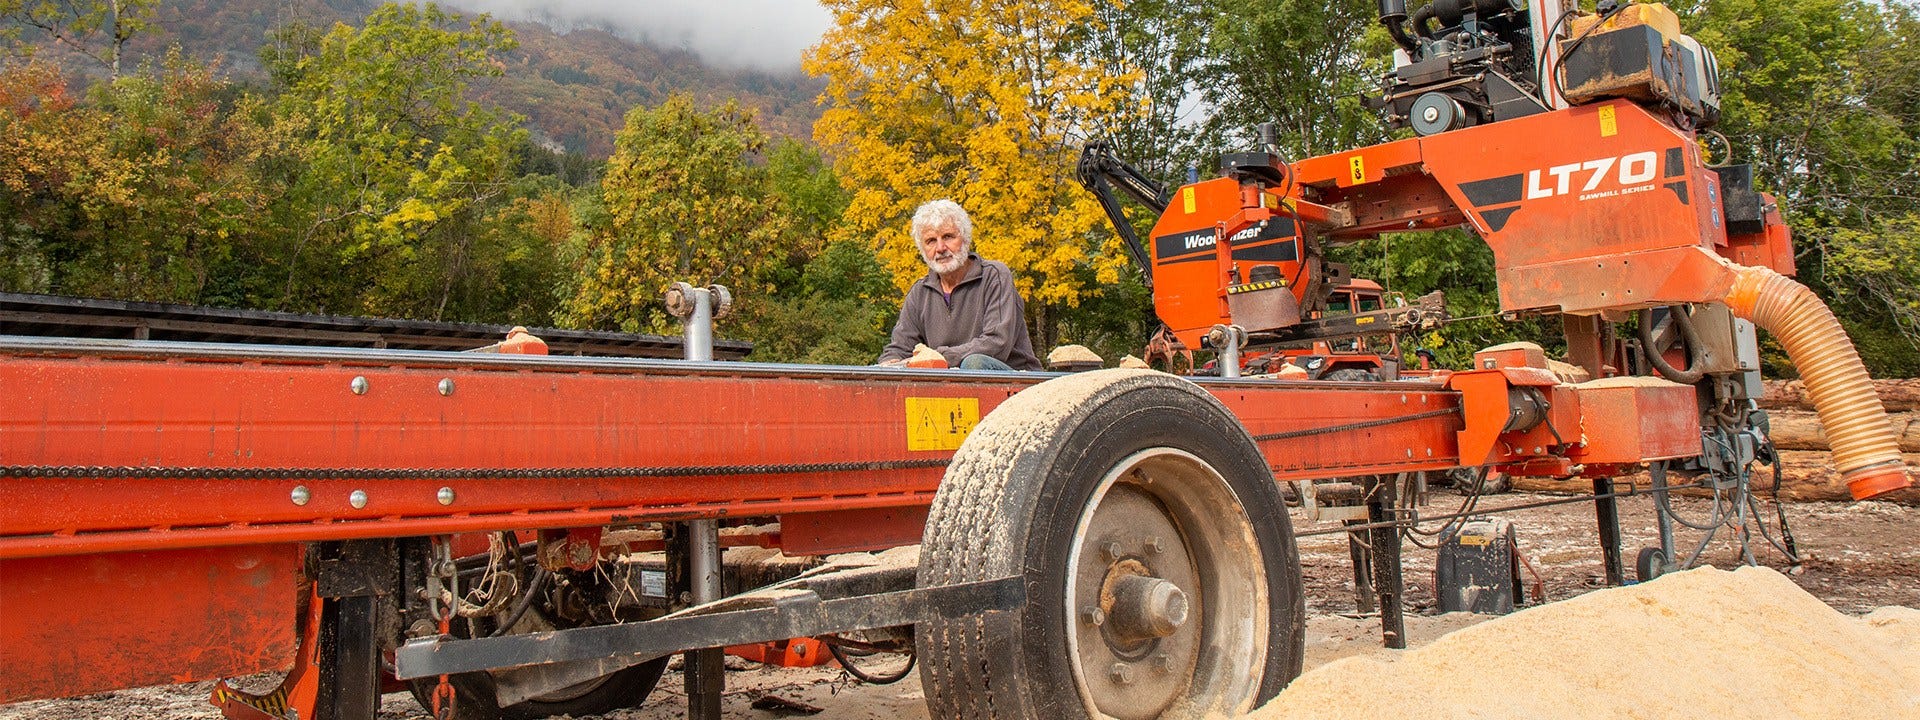 Sawmilling in the French Alps with a Wood-Mizer LT70 Mobile Sawmill 